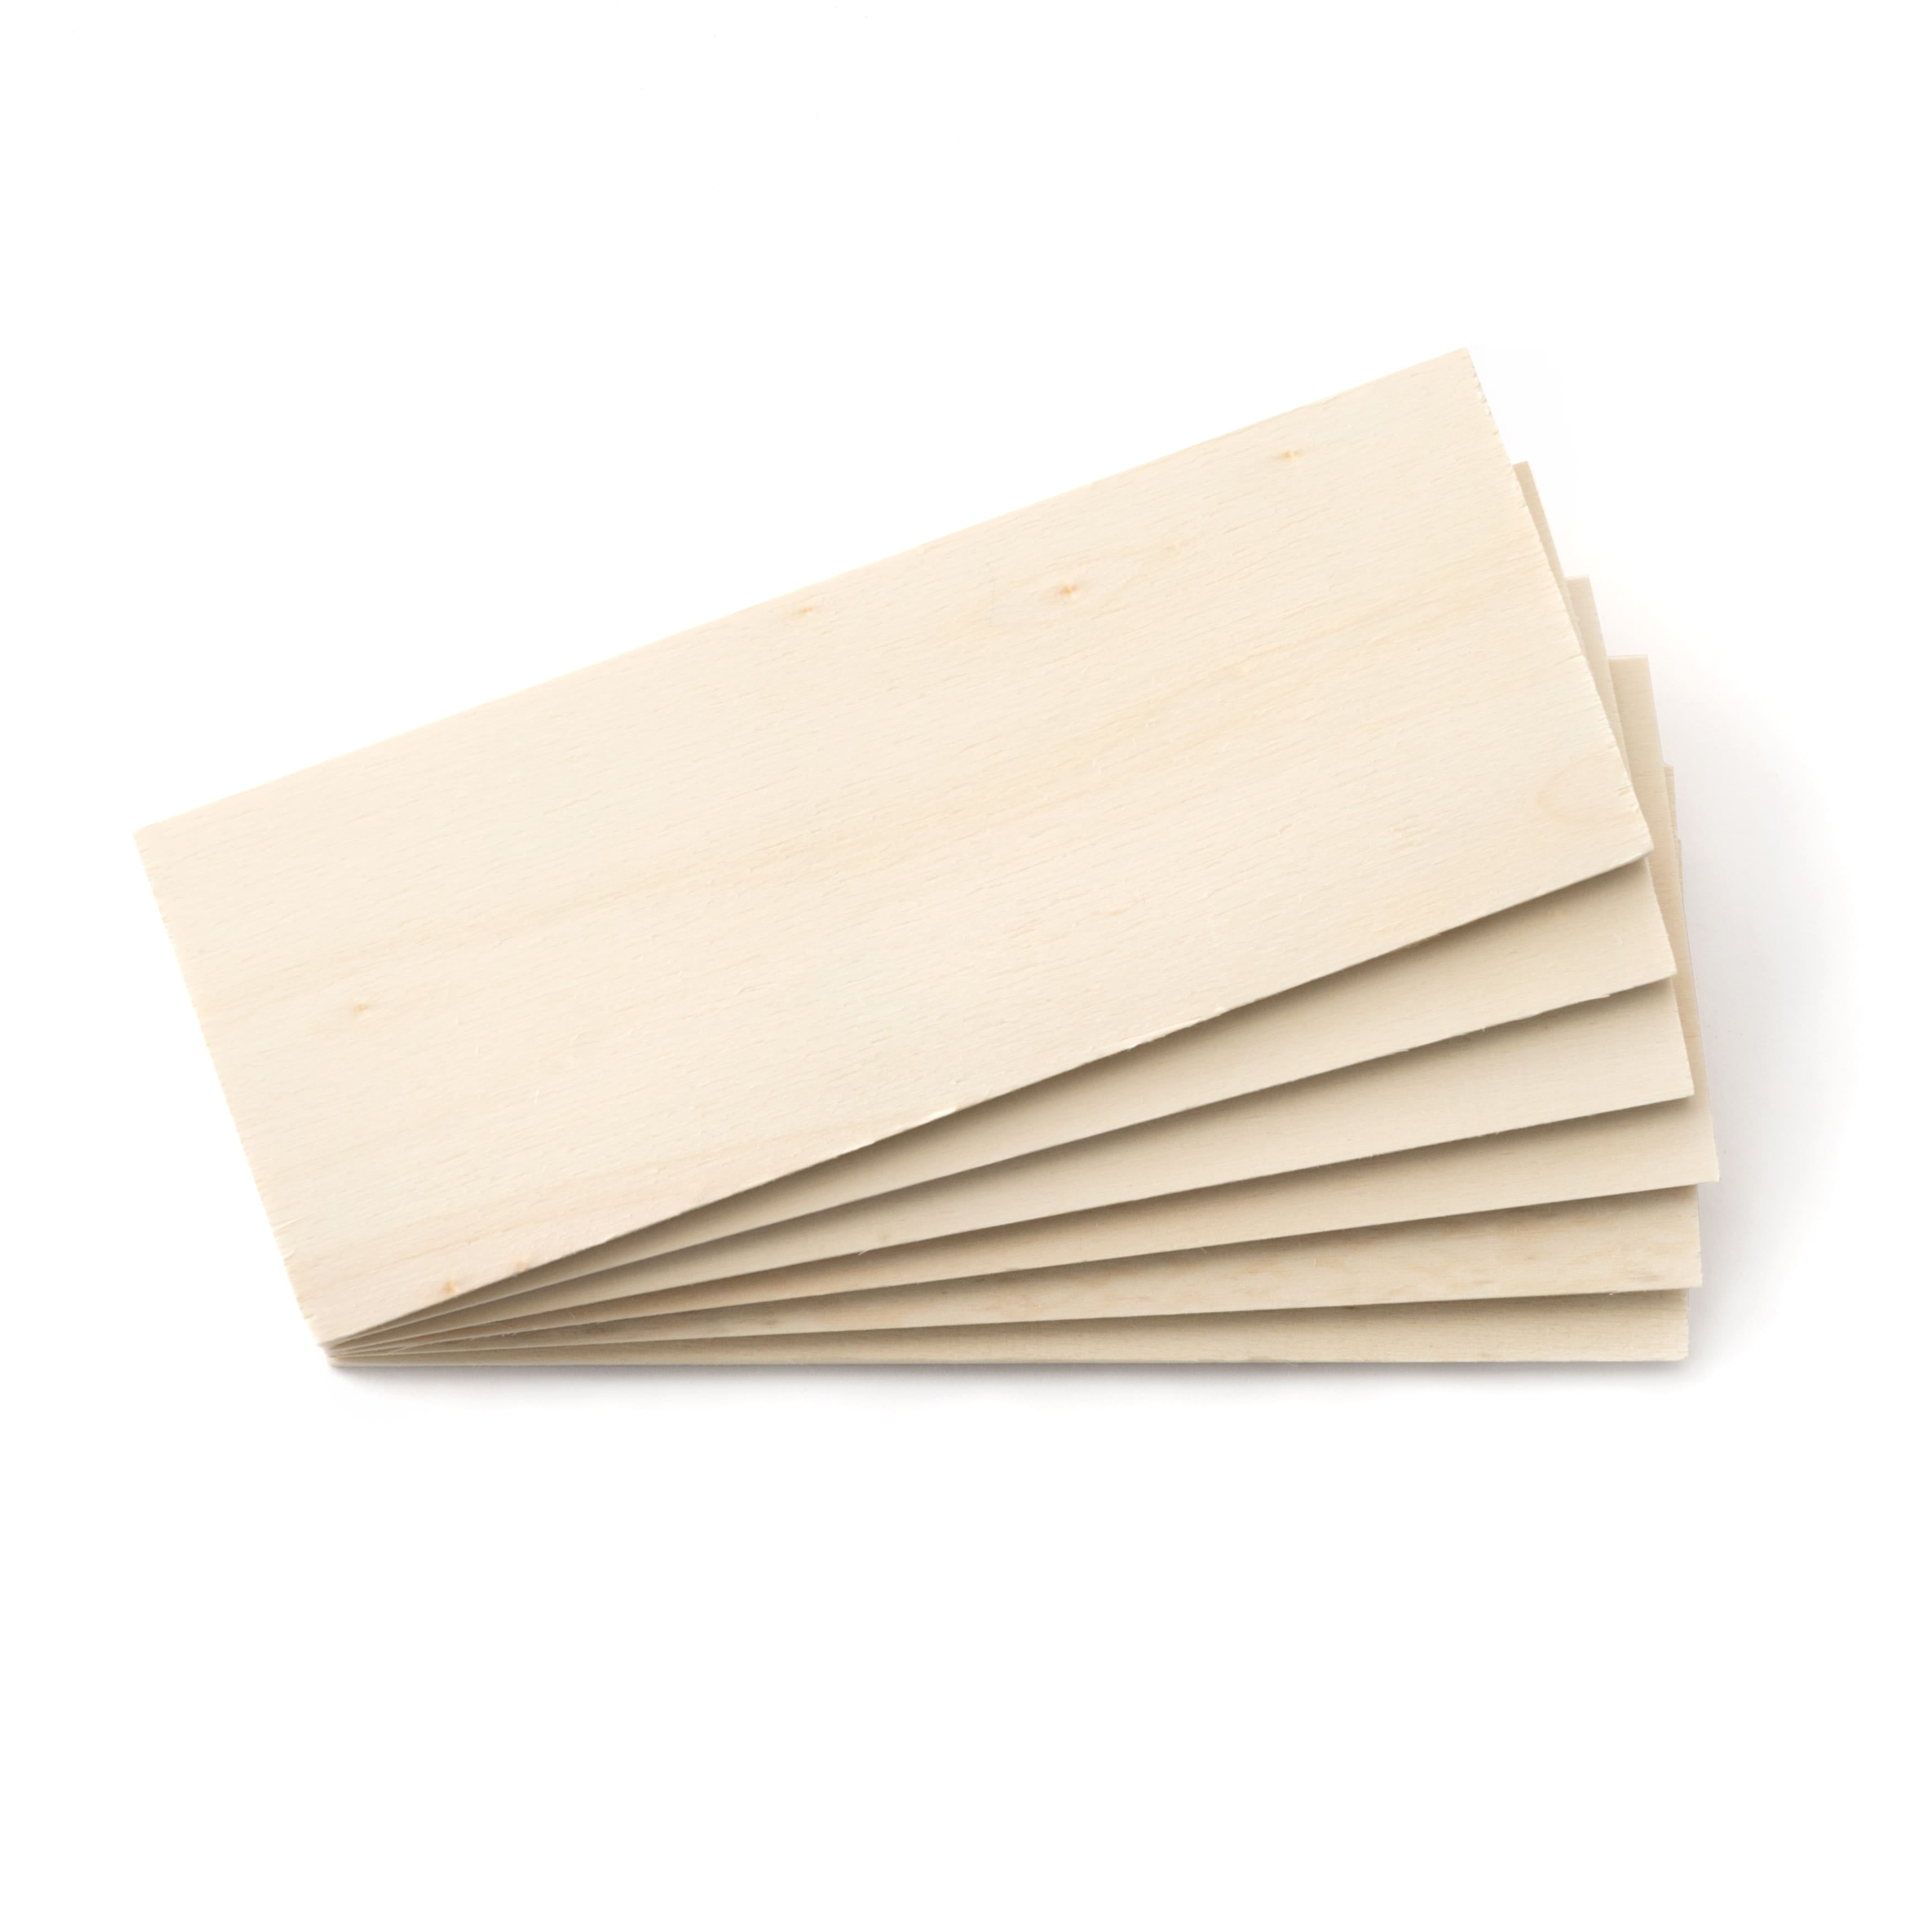 Baltic Birch Plywood Sheets 1/8 X 12 X 20, Wholesale Plywood Supplier of  Wood for Glowforge, Laser, Crafting Project, Wood Blanks 